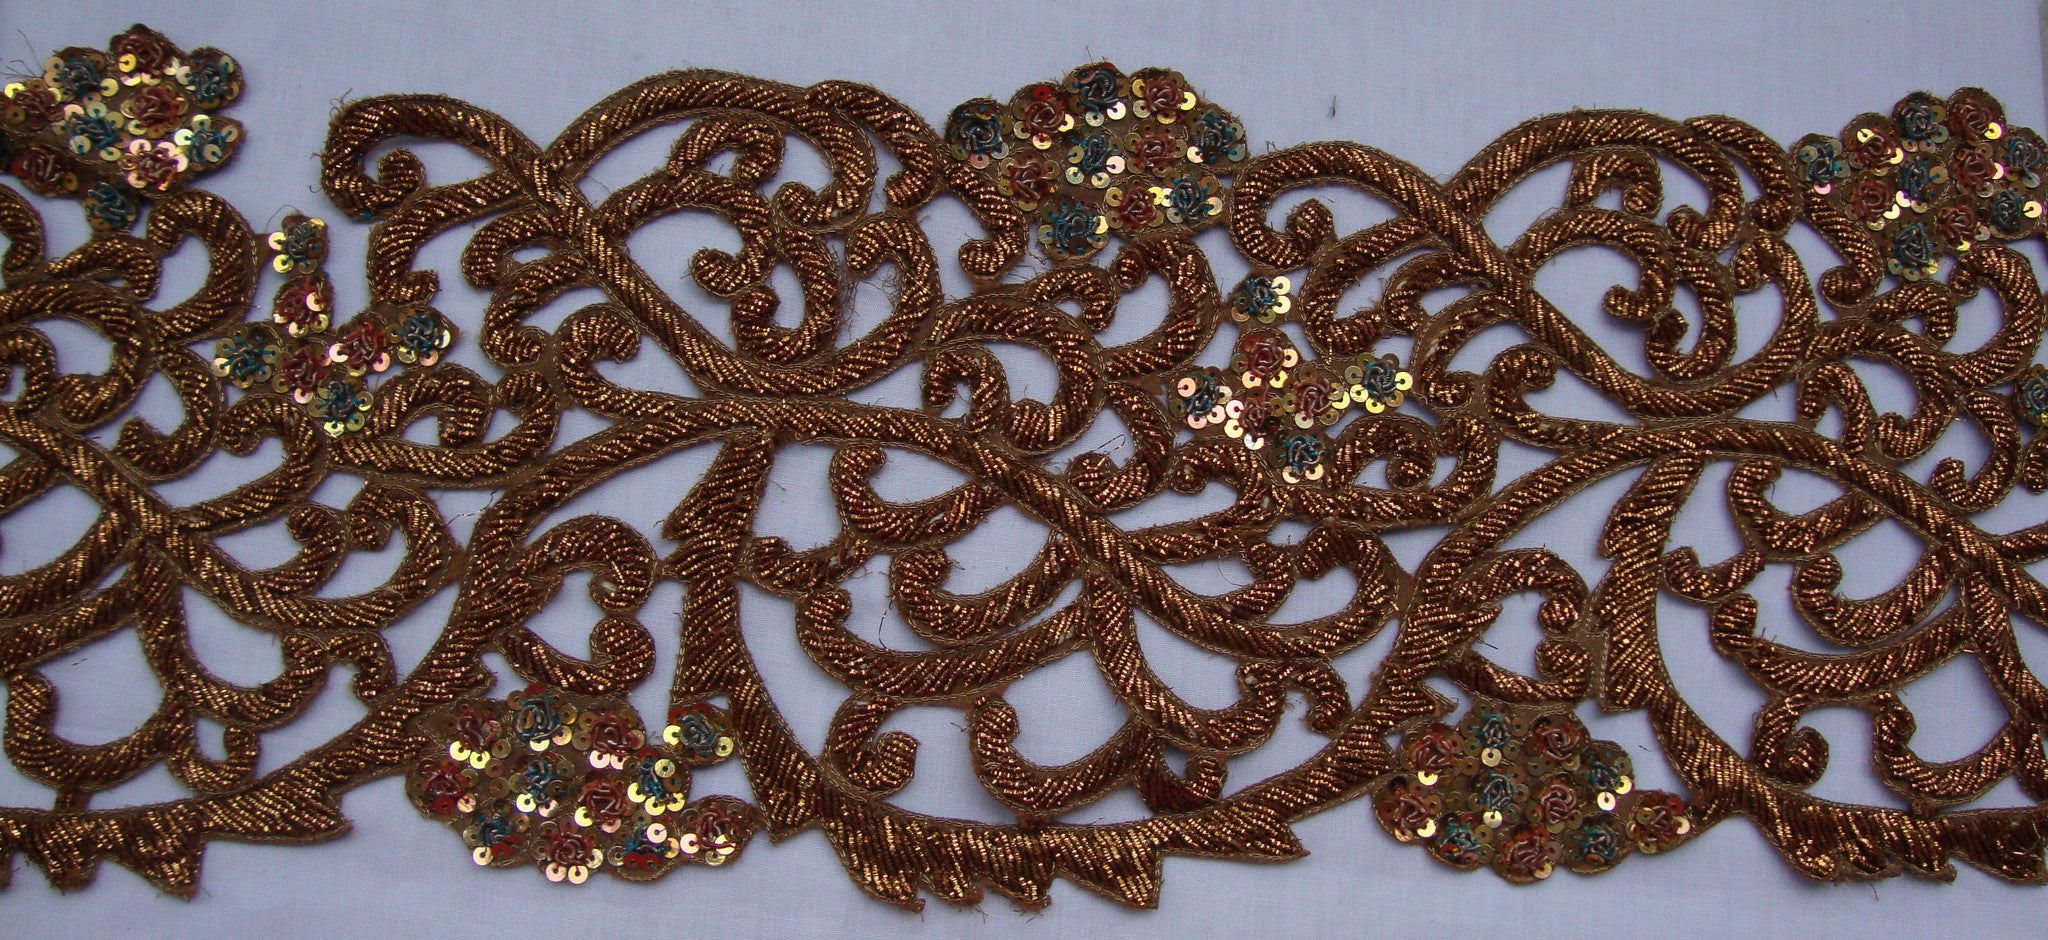 Bronze Sequined Trimming (Sold as a 2 yard piece)